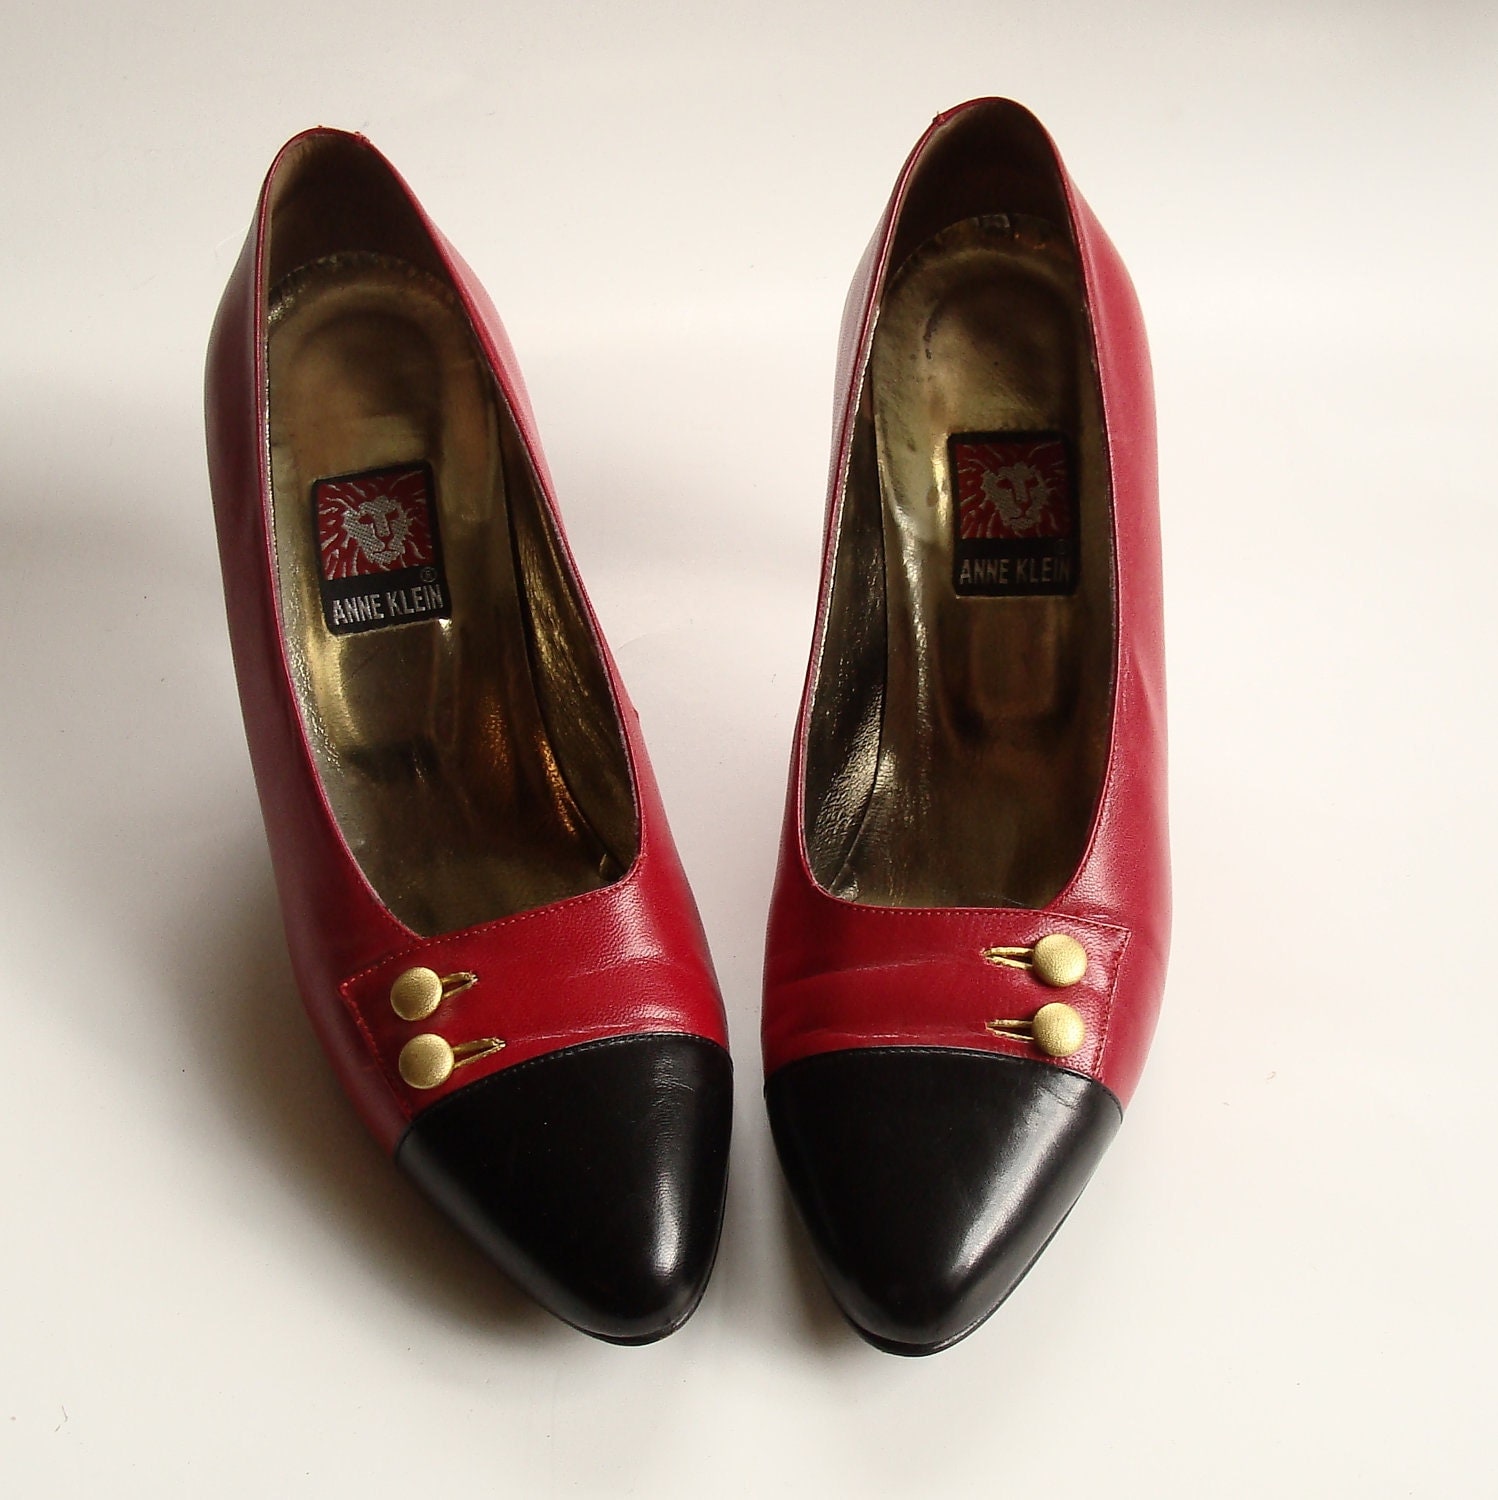 shoes size 5.5 / red and black leather heels / 1980s pumps